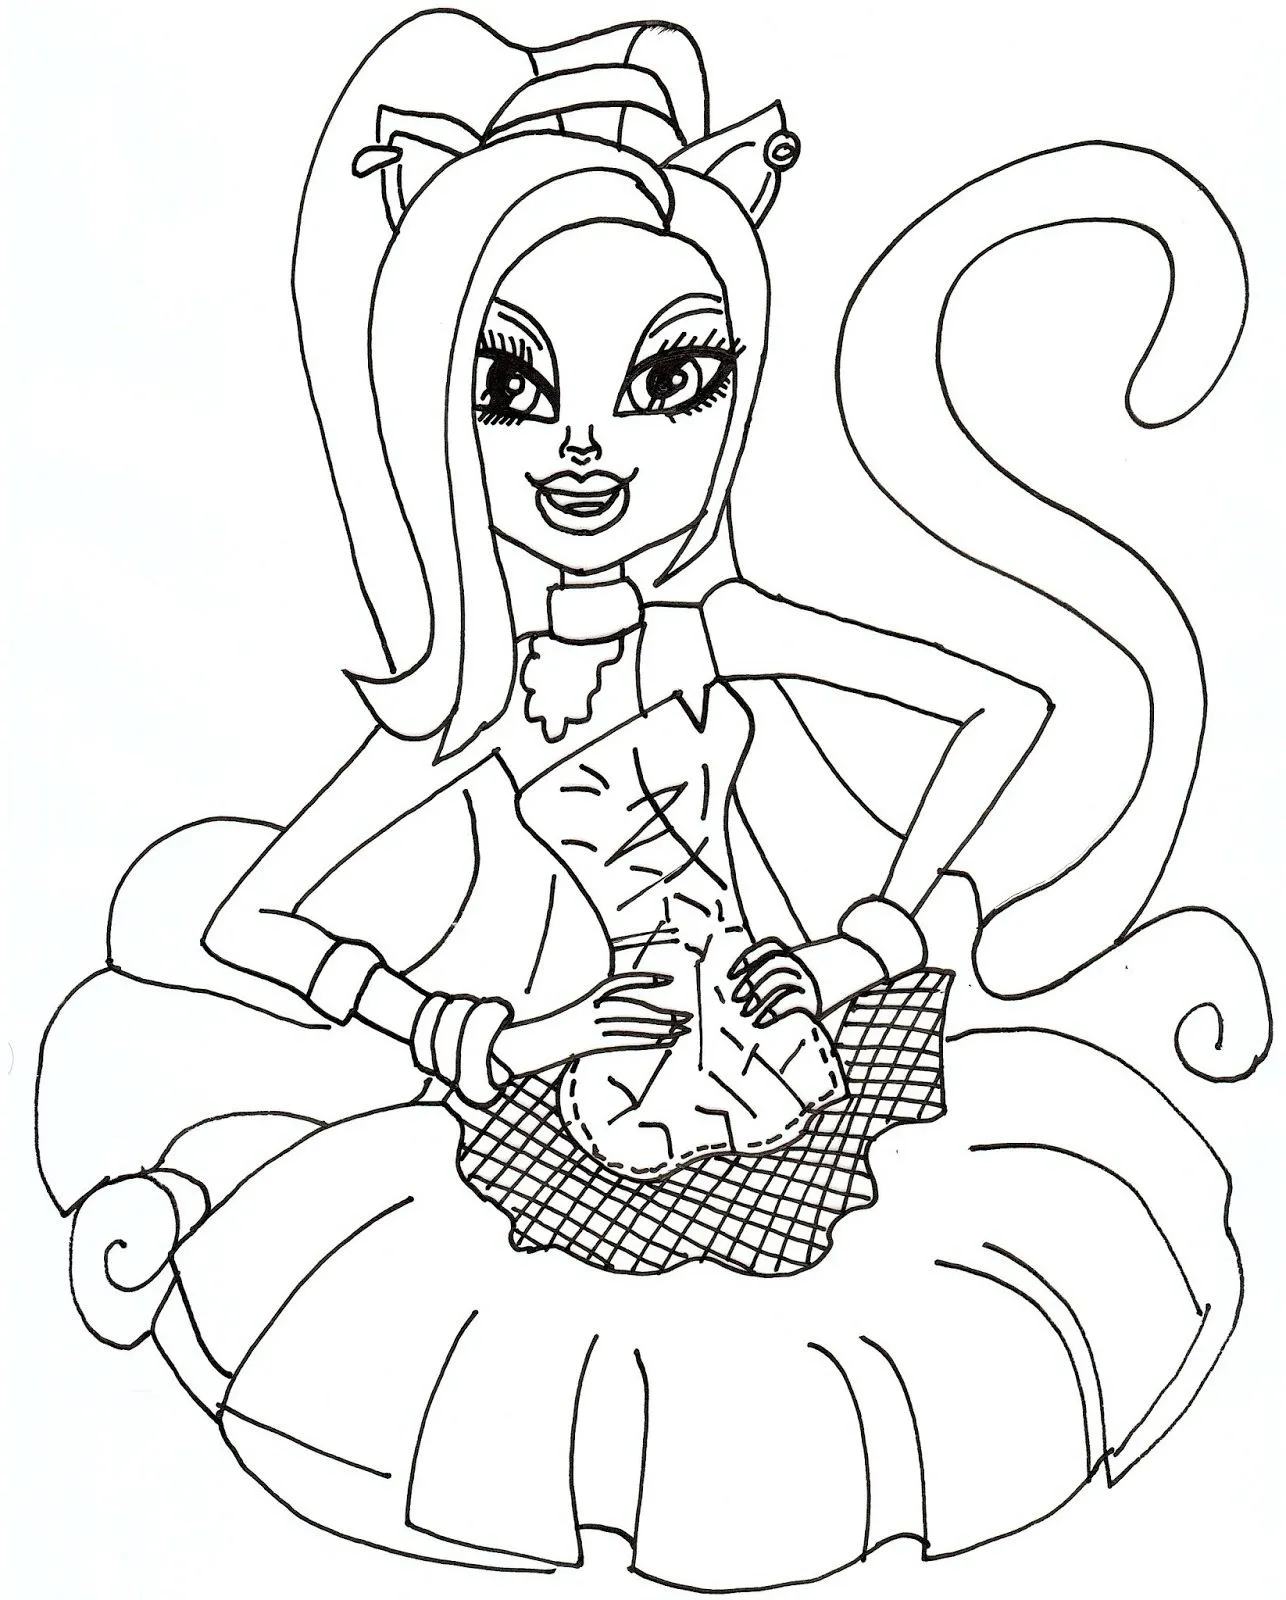 Free Printable Monster High Coloring Pages: May 2013